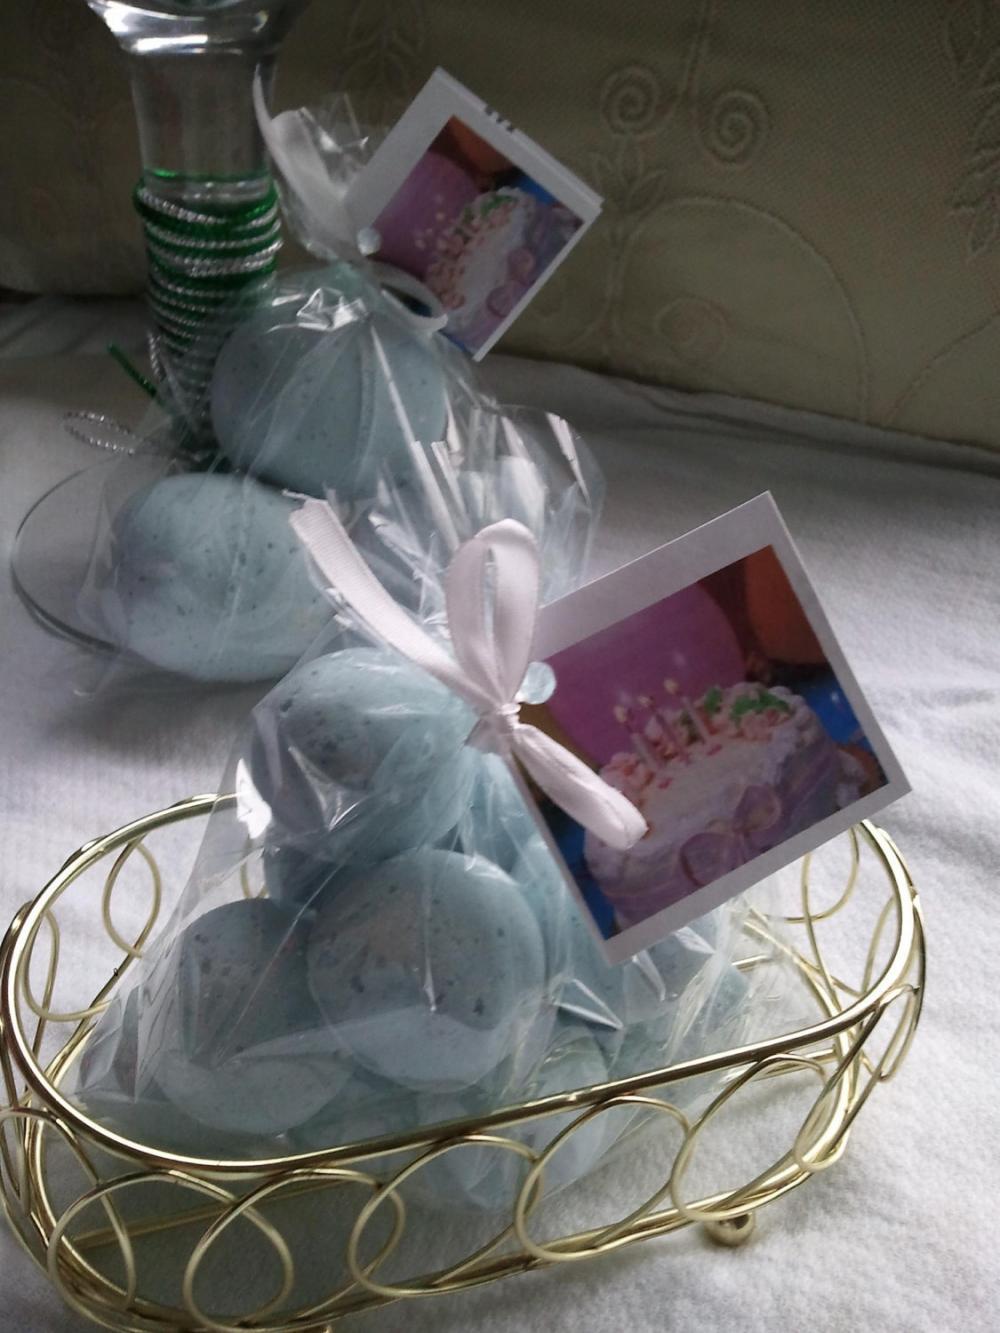 3 Bath Bombs 4 Oz Each (birthday Cake) Gift Bag Bath Fizzies, Great For Kids, Parties ...and Adults Too